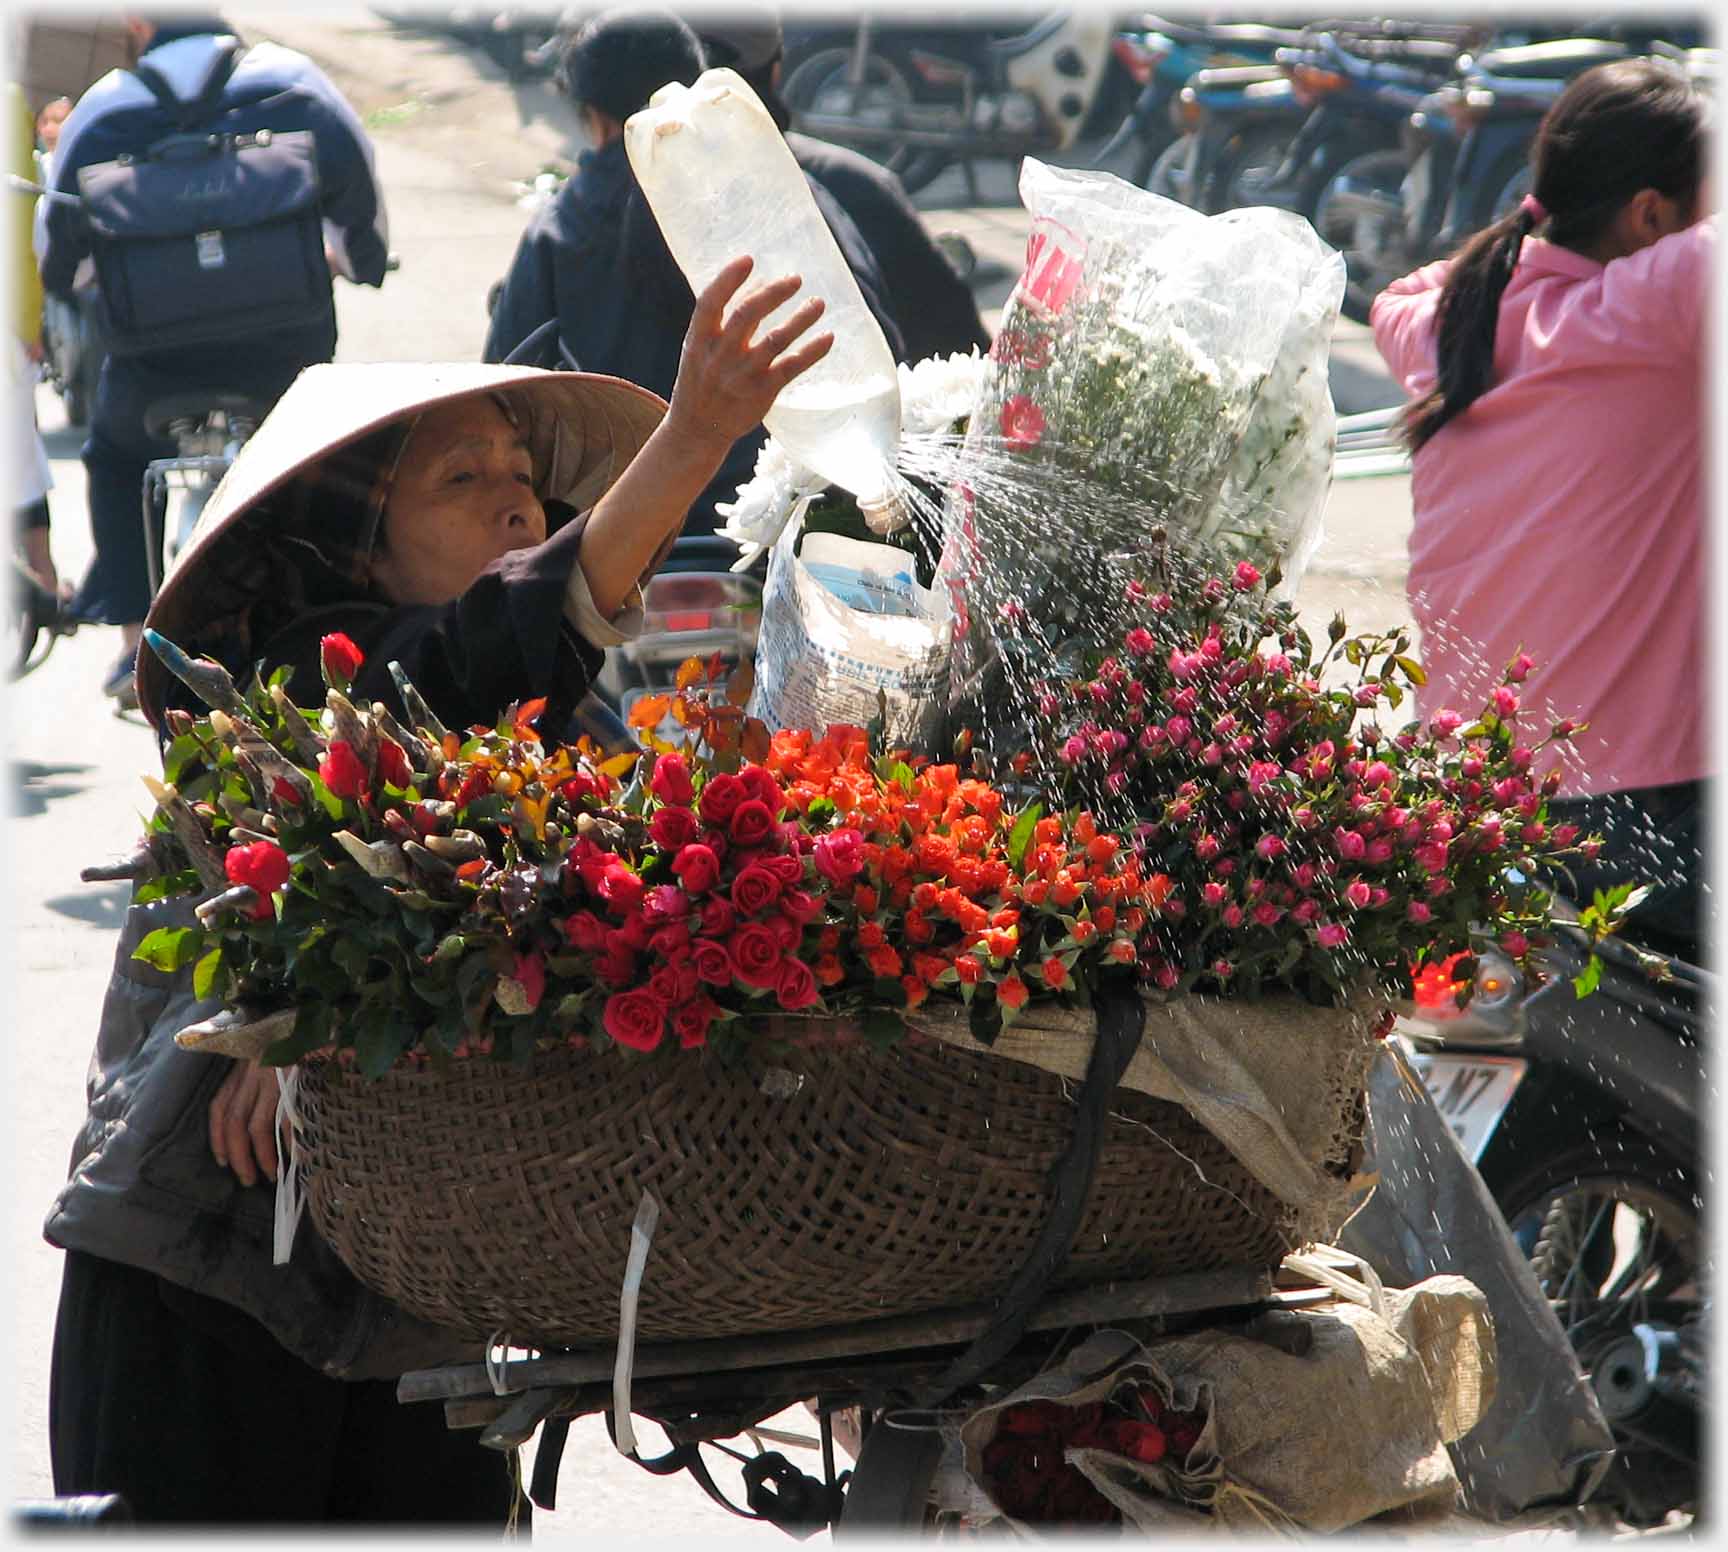 Woman in conical hat shaking bottle of water over flowers.